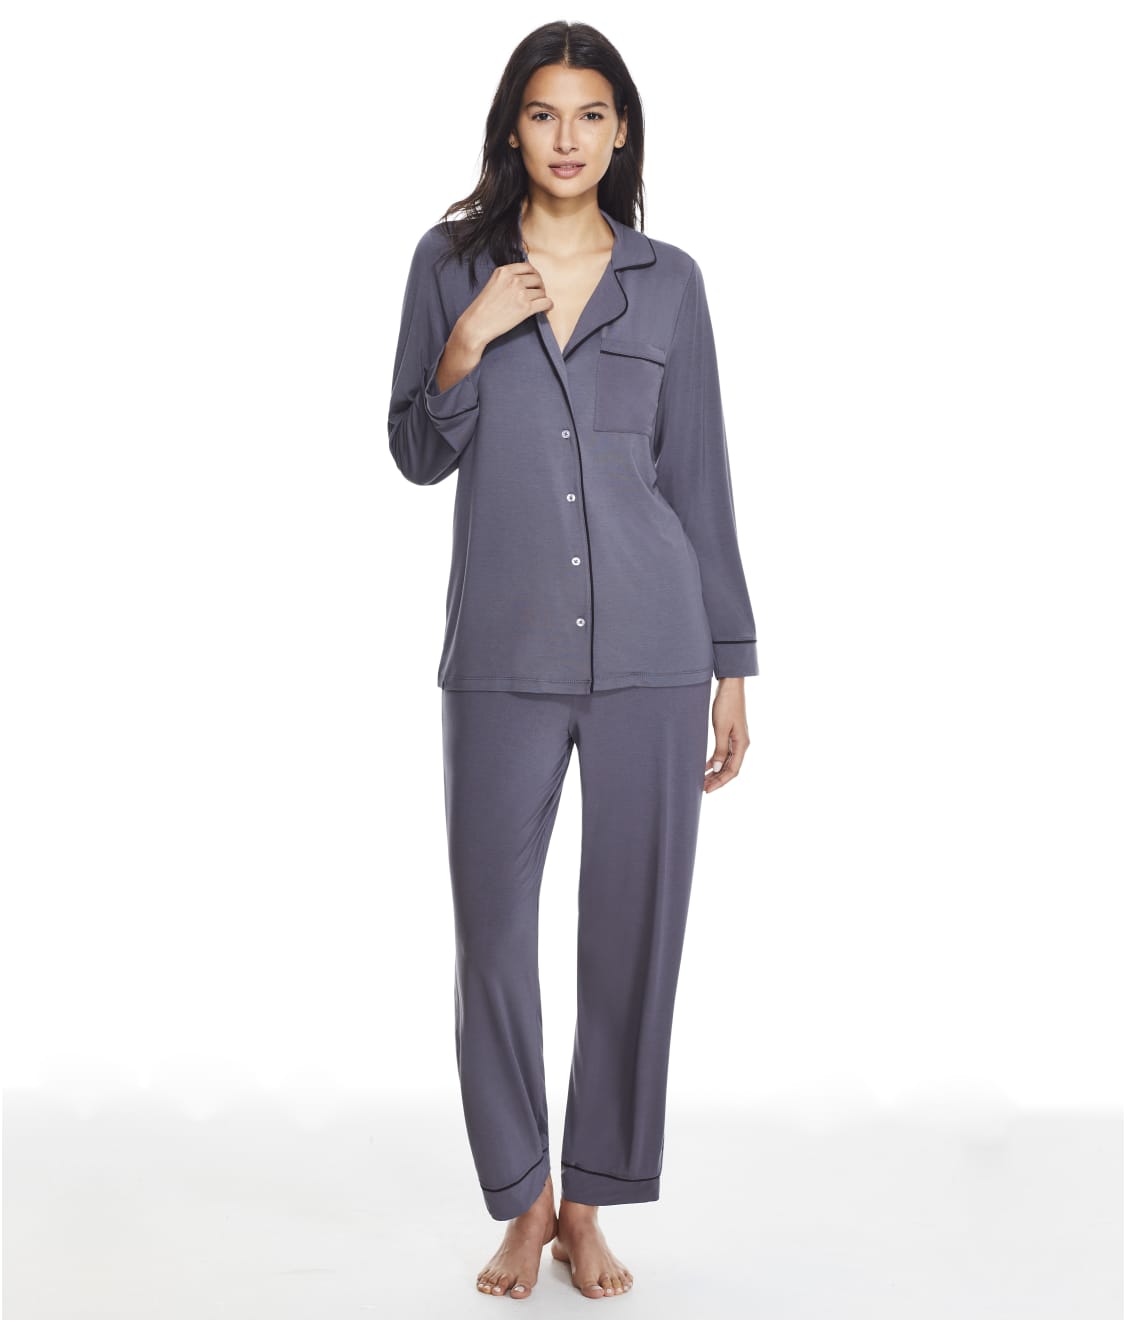 Barefoot Dreams: Luxe Milk Jersey Modal Piped Pajama Set BDWLM0186